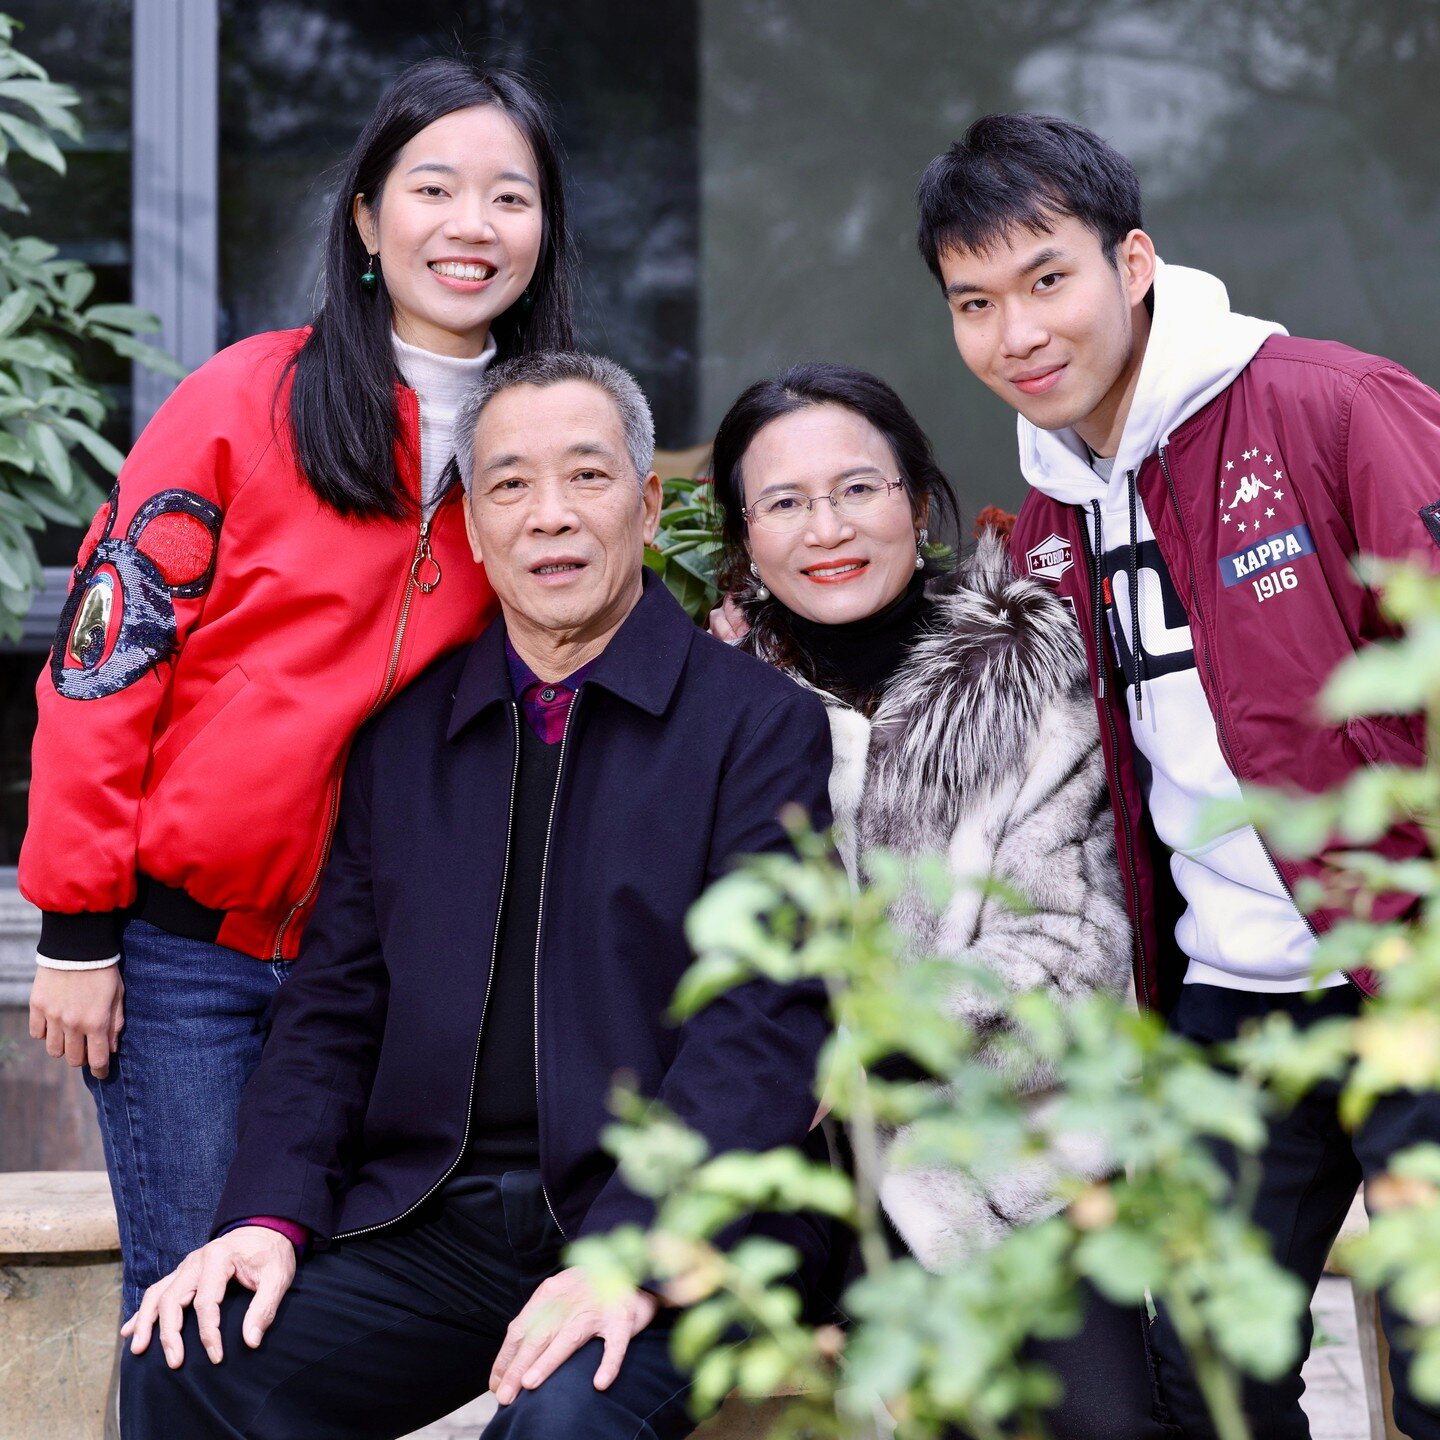 Last part of Jiawen's generosity story! 👏😍

(3/3) Through my family, I learned that generosity stems from humility and thankfulness. 

Because my parents were self-made in their business, they always had the mindset of telling me to not accept disc